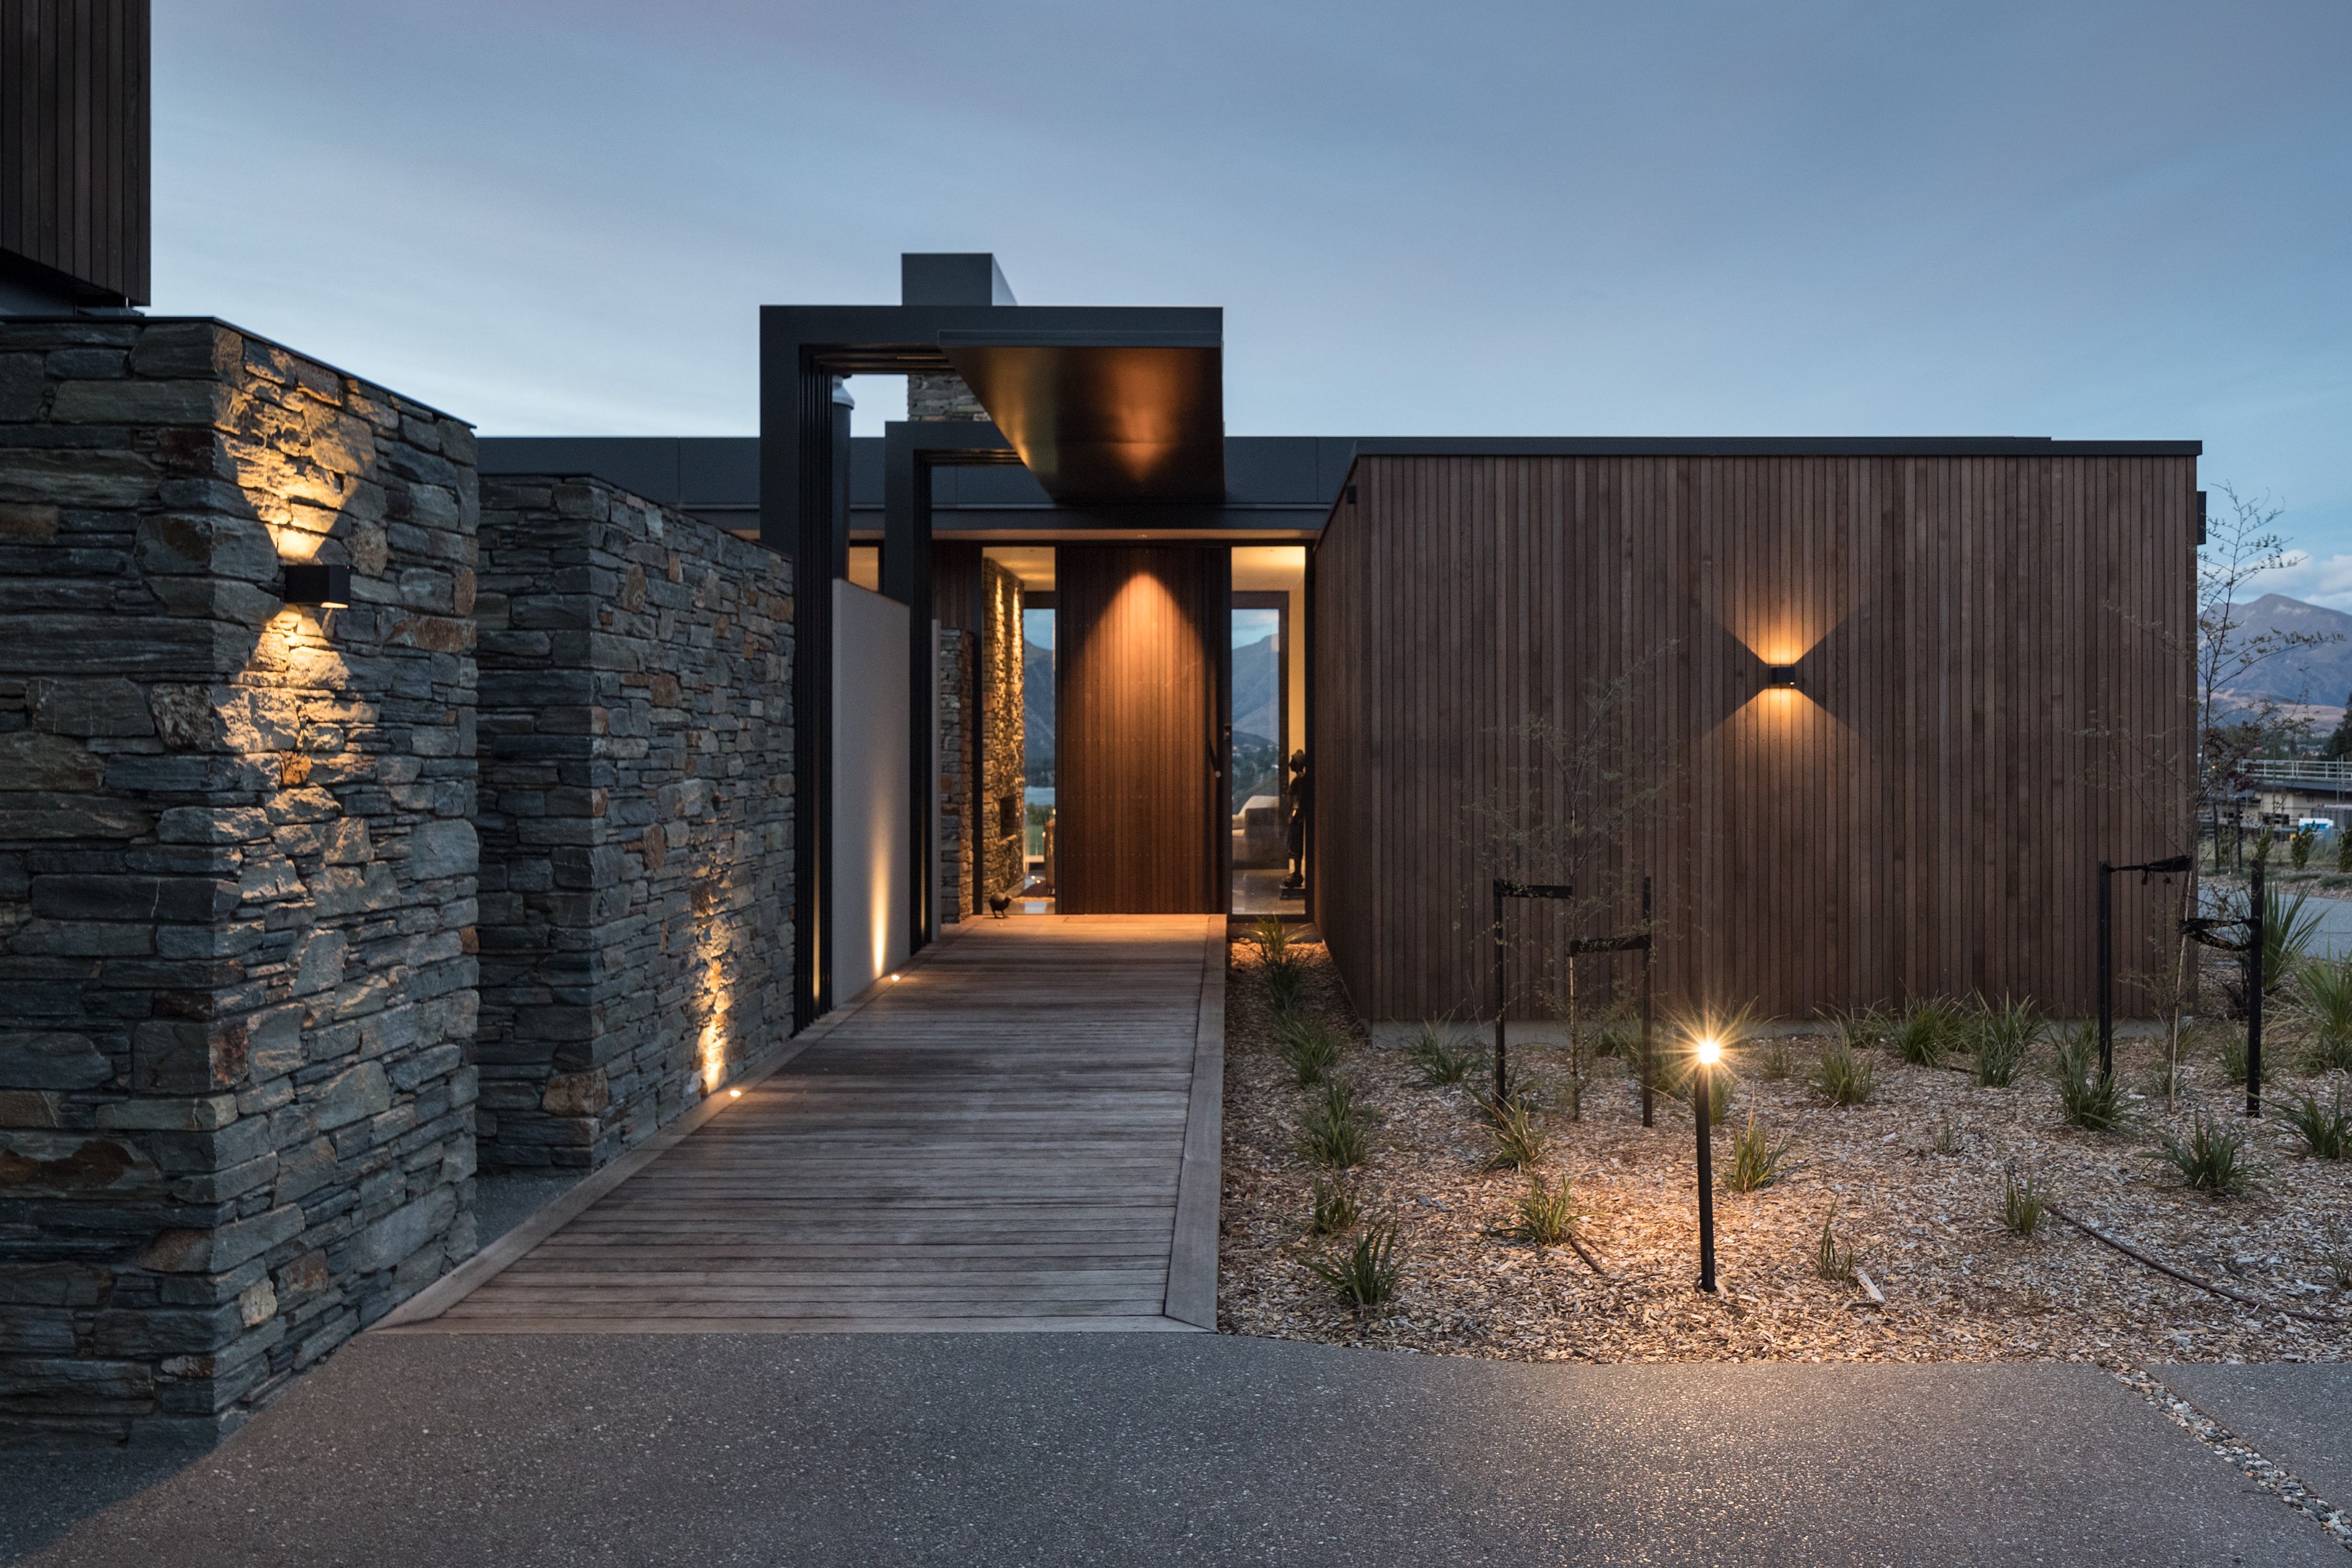 Exterior of modern Wanaka residence mixing stone, wood, and steel